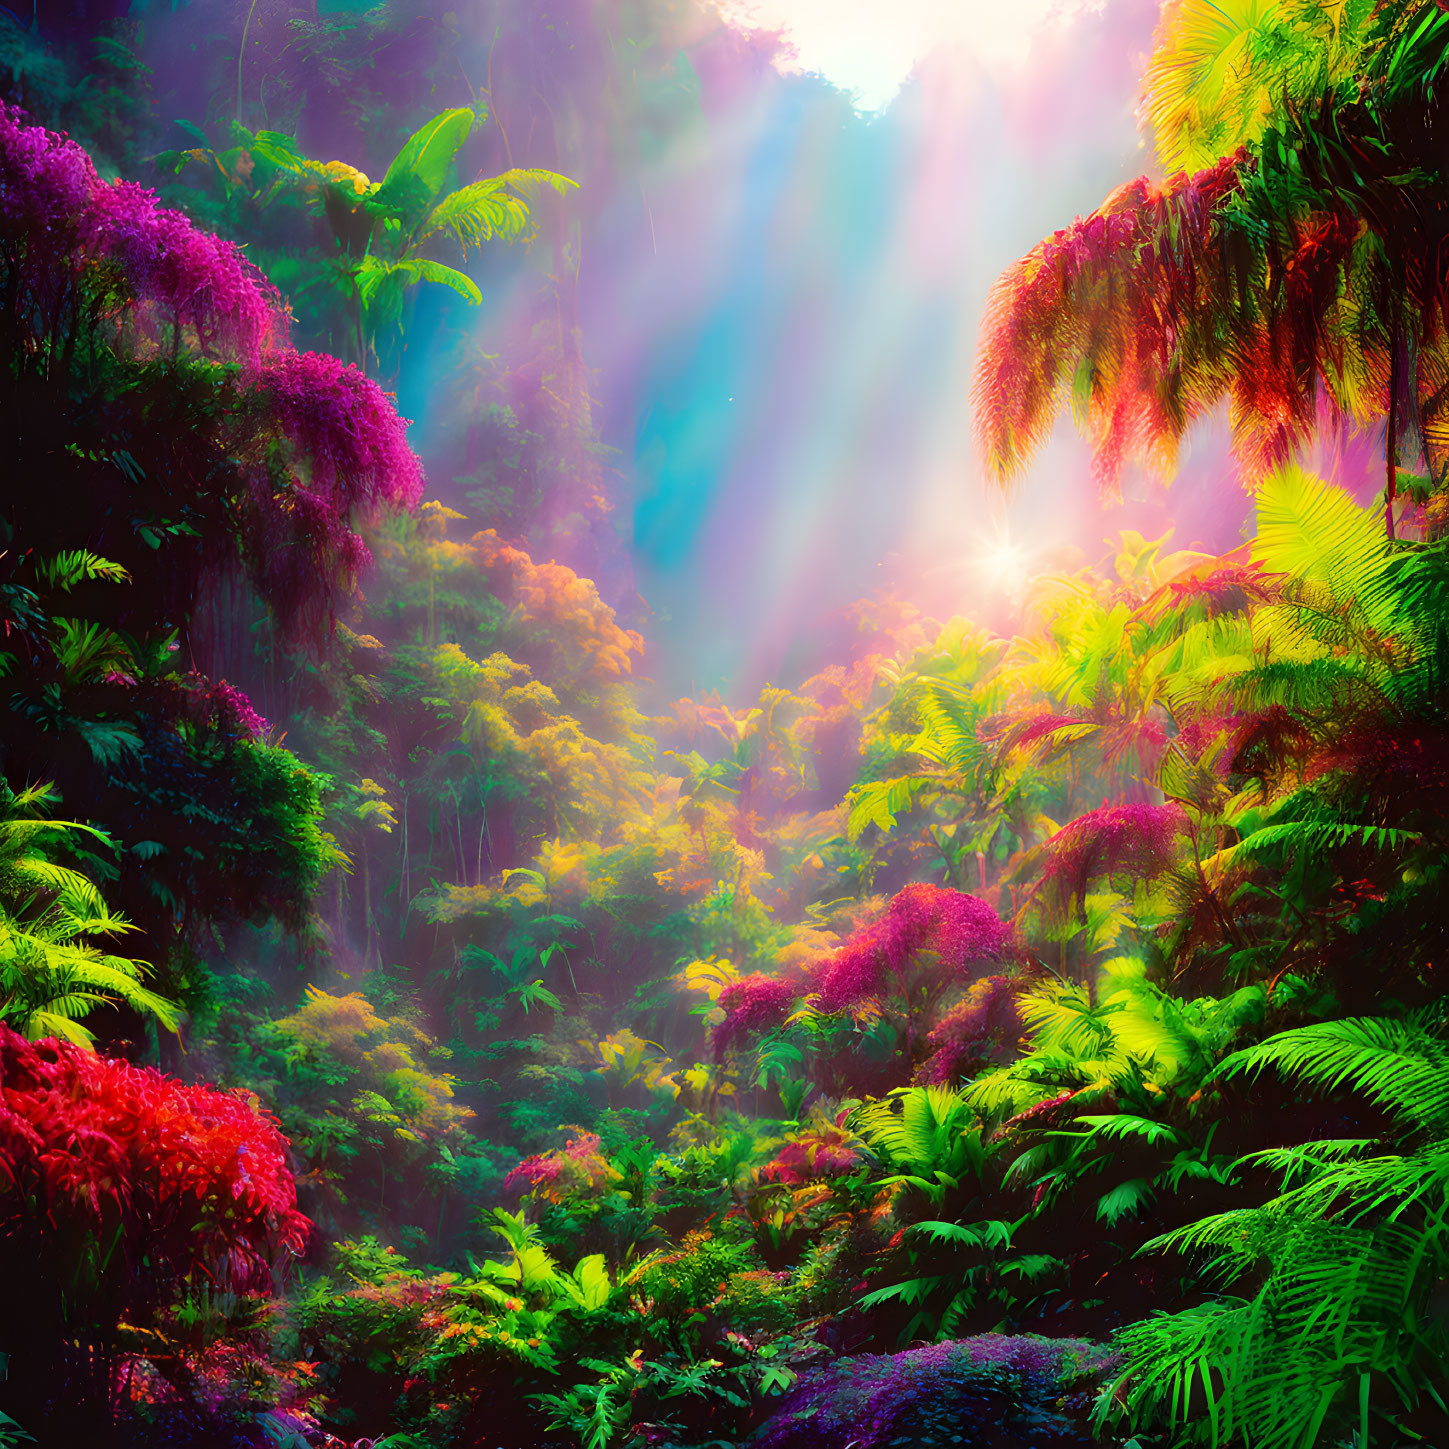 Lush Rainforest with Colorful Foliage and Sun Rays